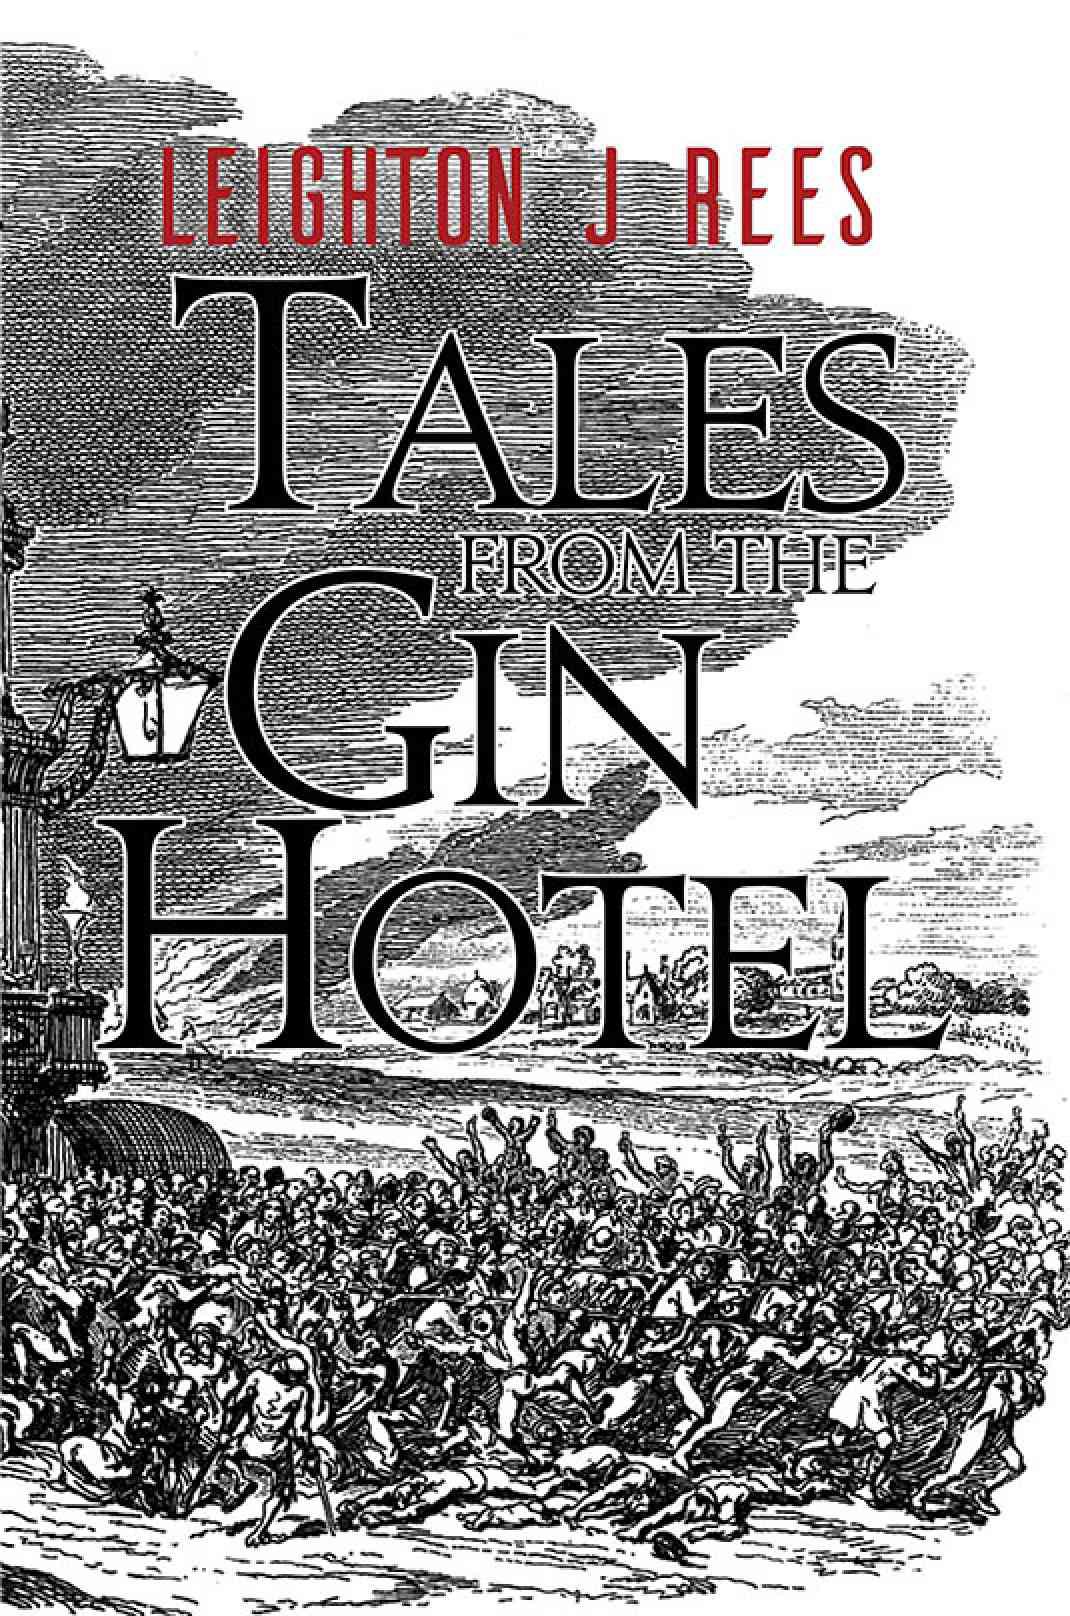 Poet Leighton J Rees’s Poem From Tales From the Gin Hotel Gets Featured on YOUTUBE